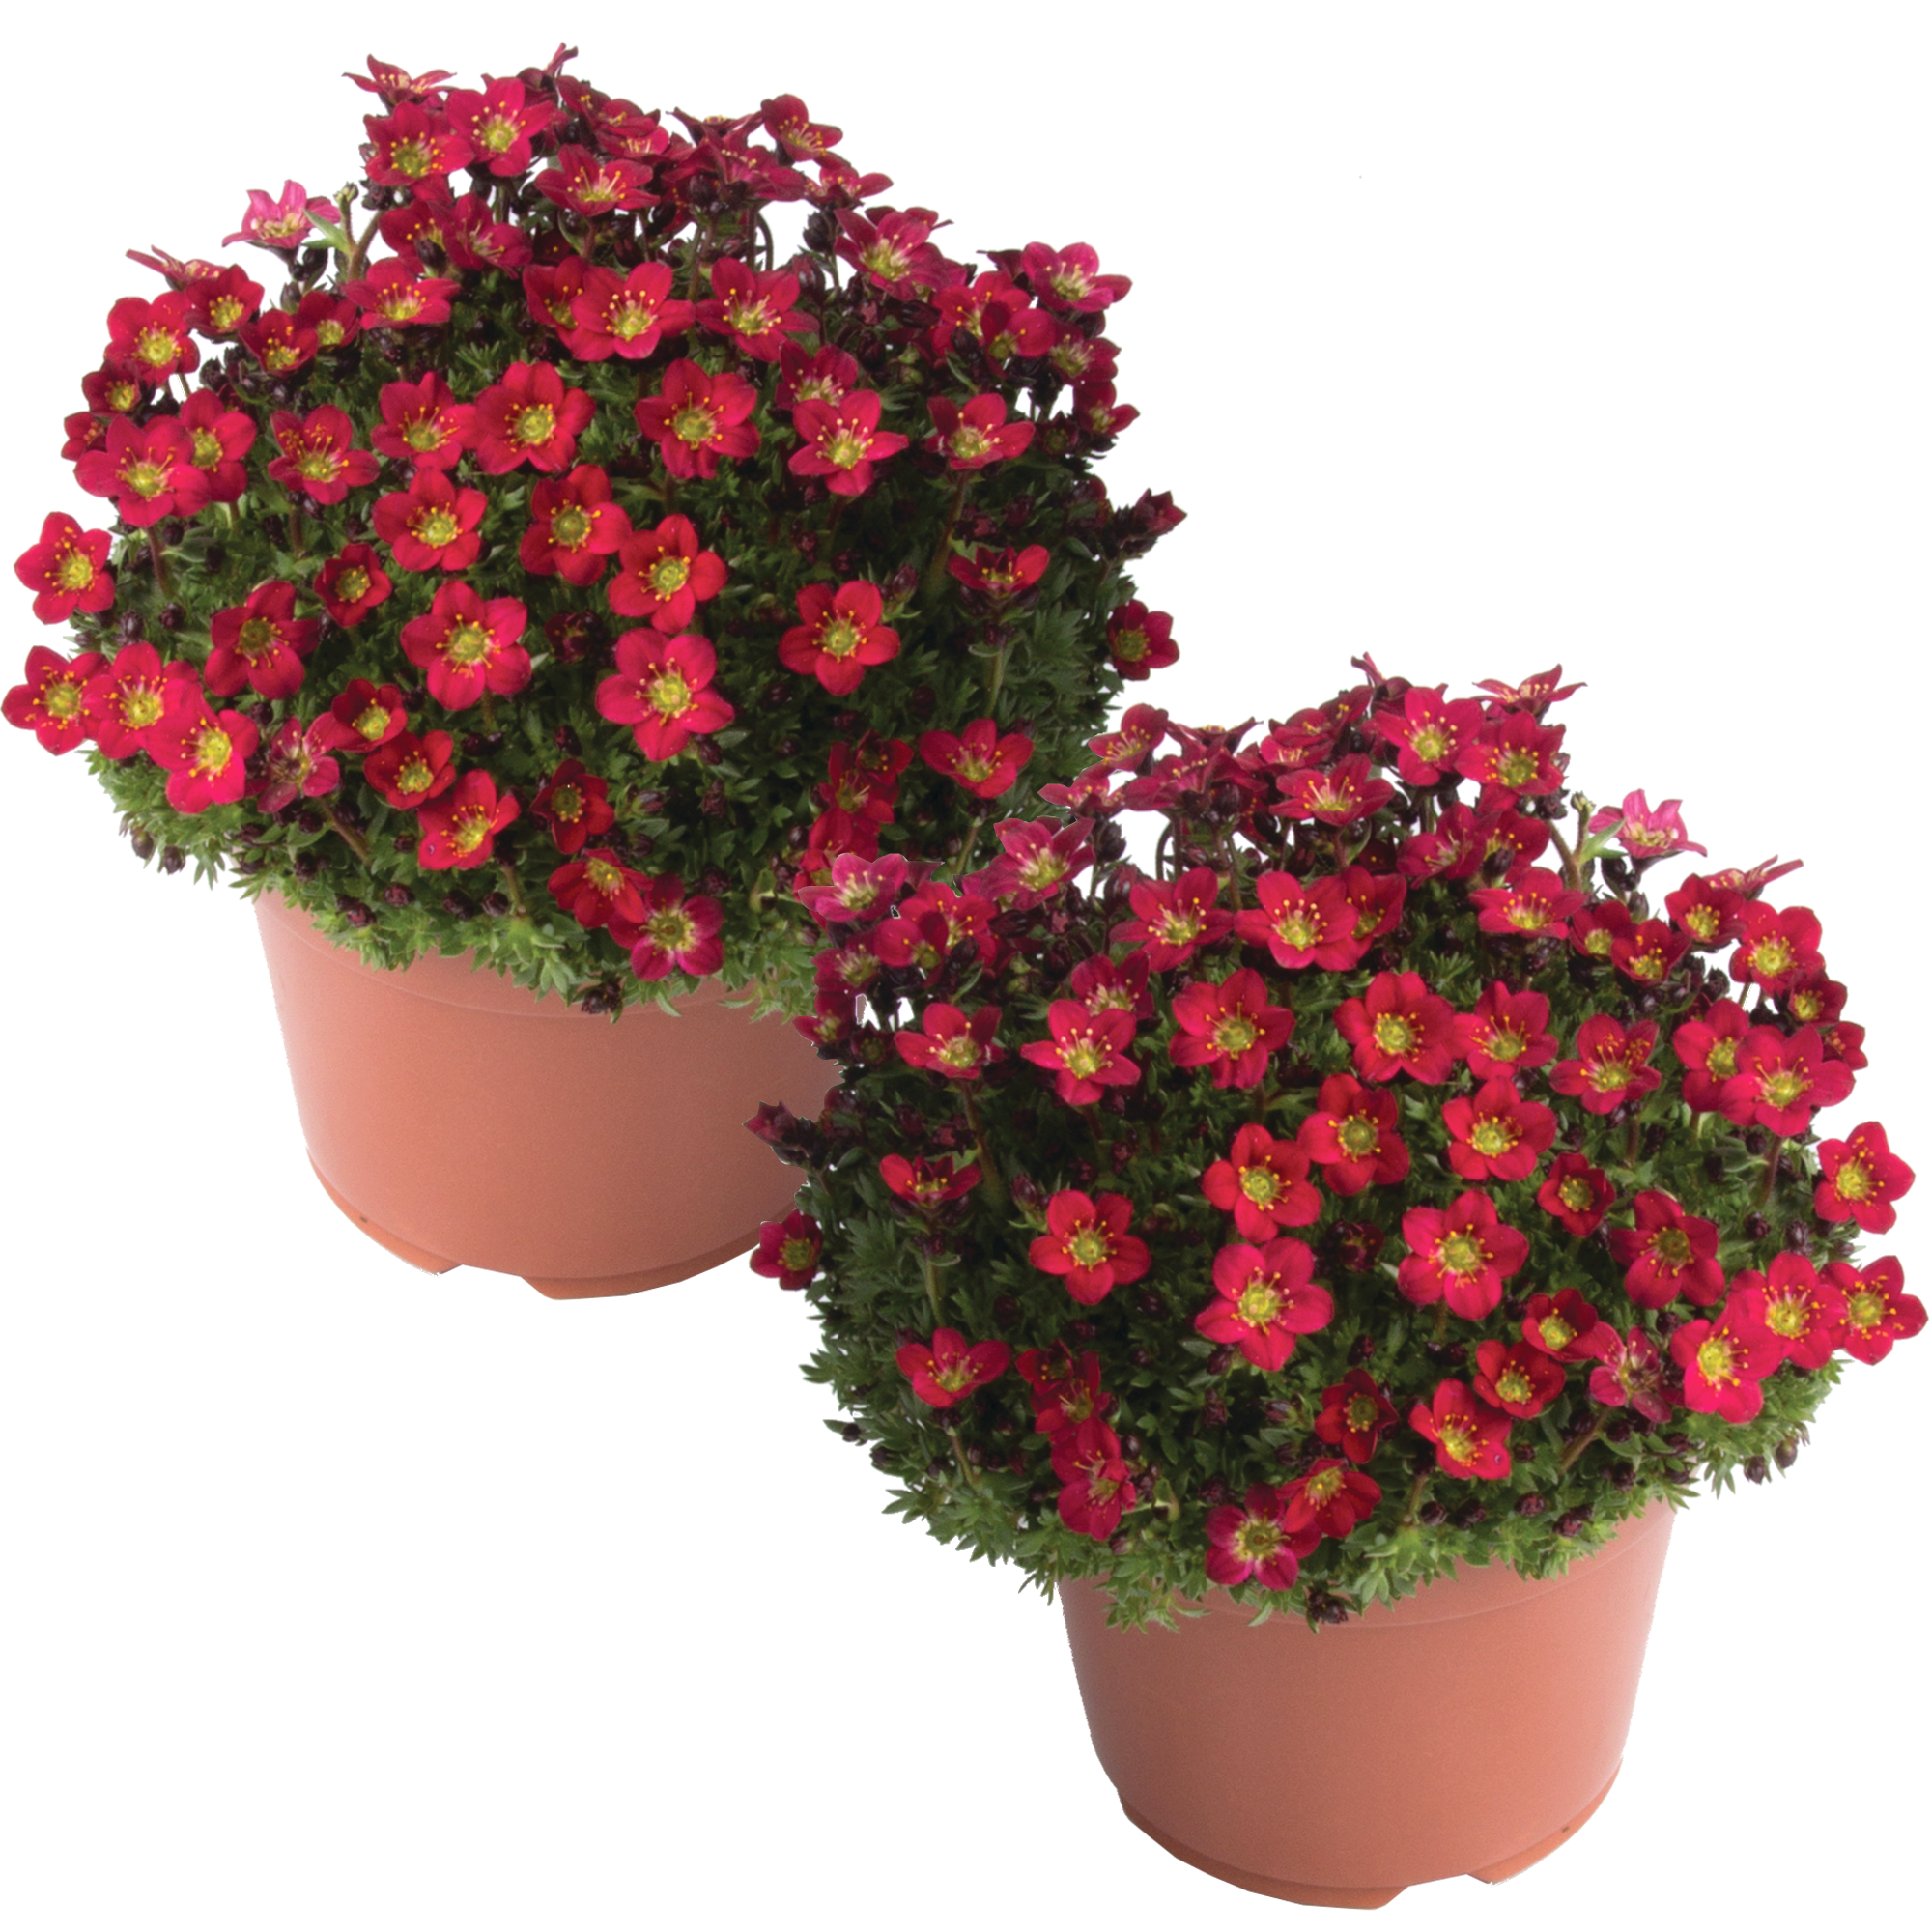 Moos-Steinbrech 'Pixi Pan Red' rot 13 cm Topf, 2er-Set + product picture